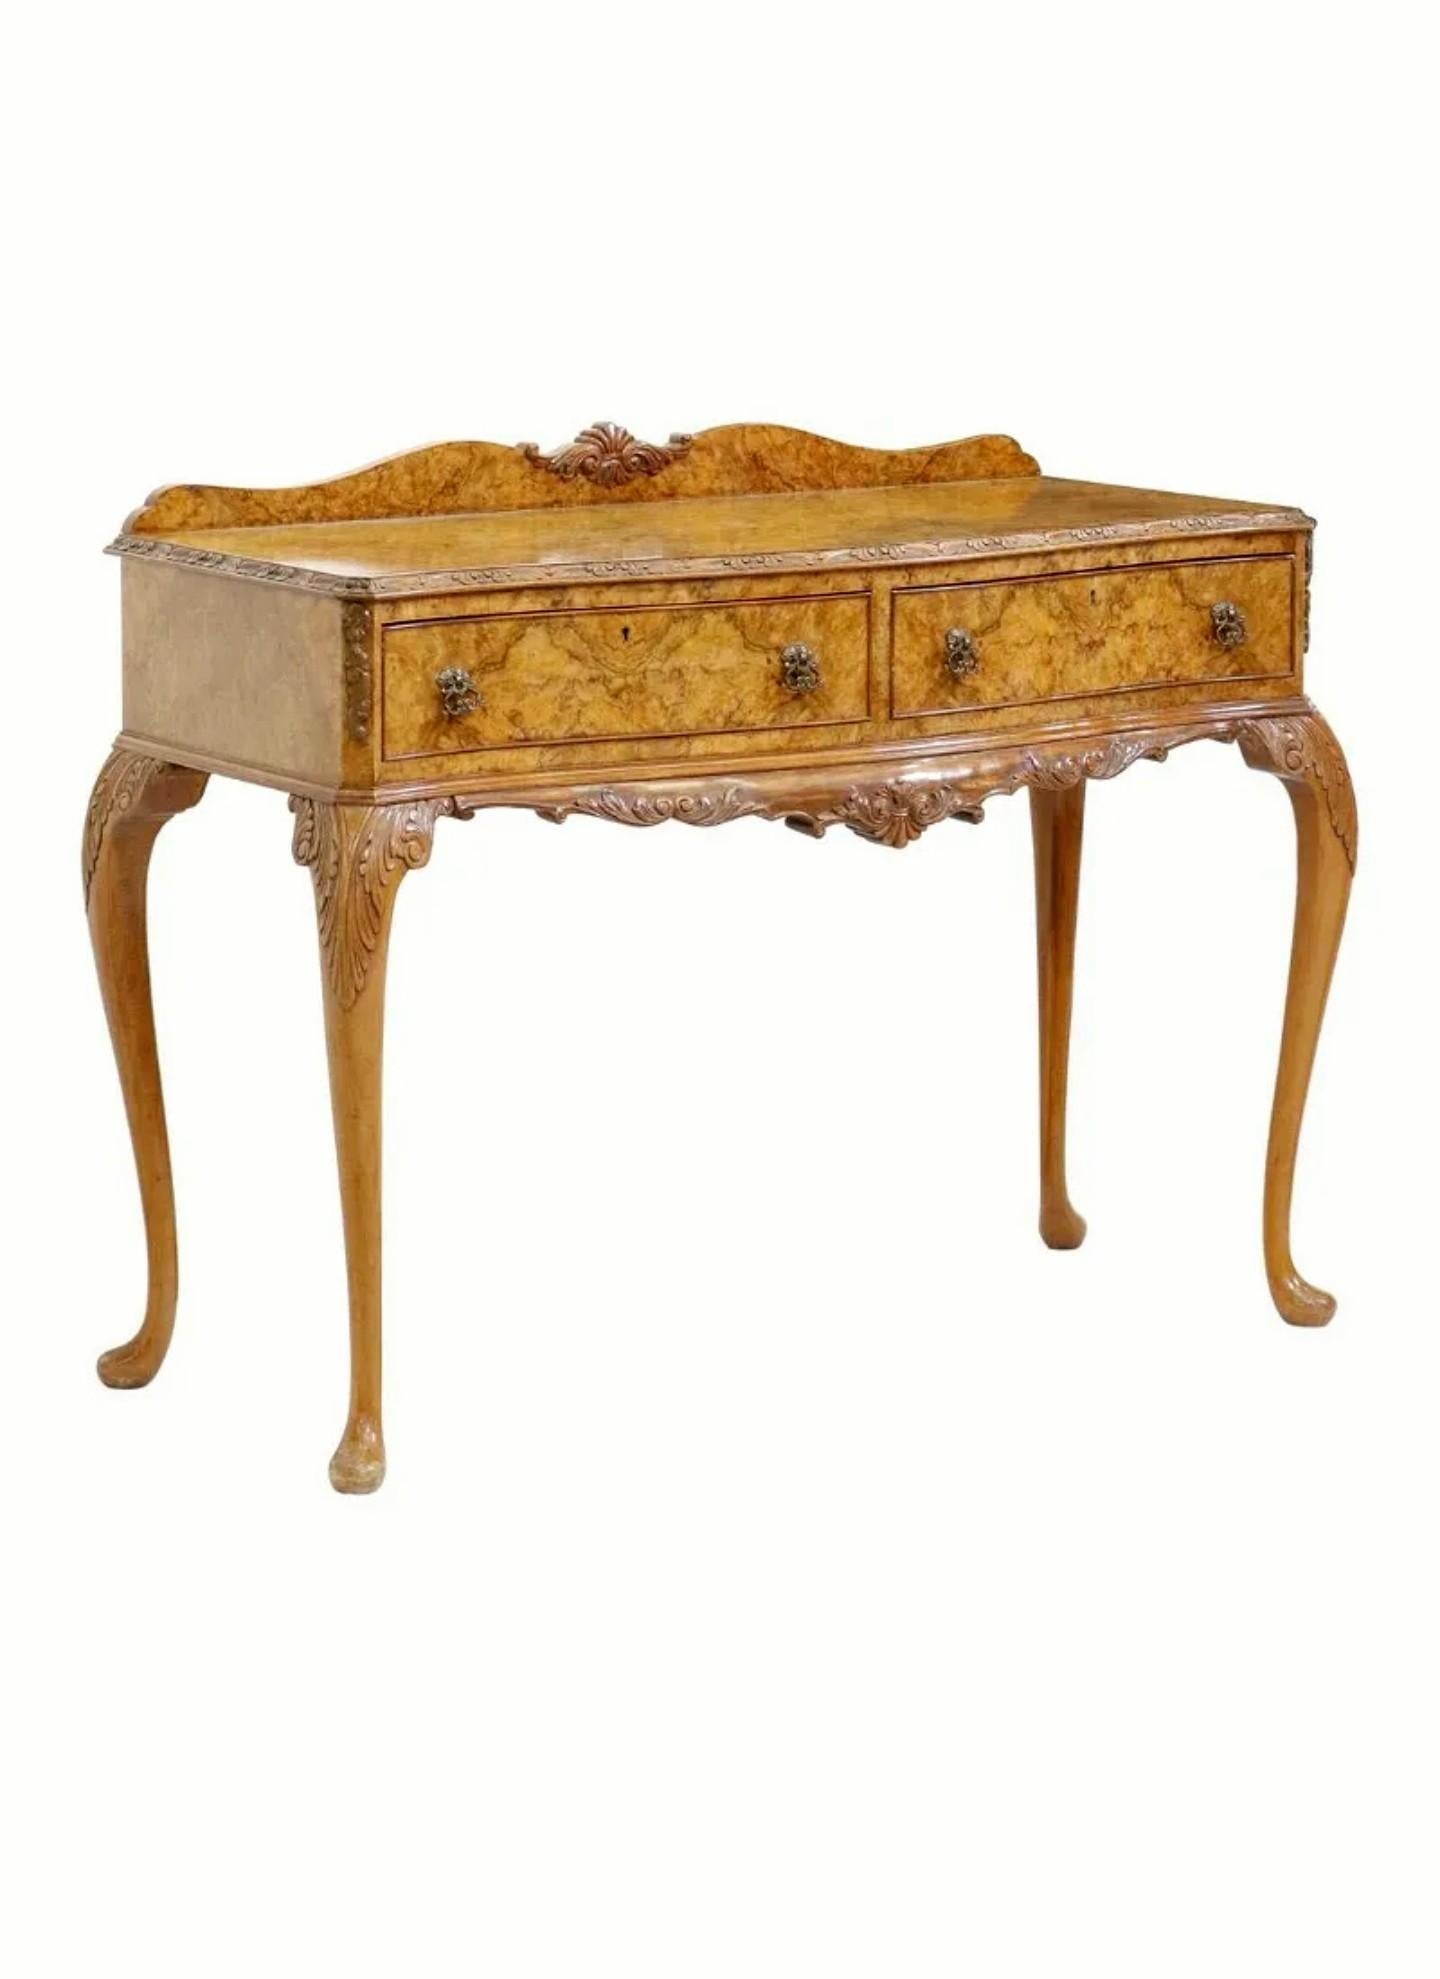 A stunning Georgian Revival burlwood silver chest / buffet server.

Refined, elegant, sophisticated English styling, exquisitely hand-crafted in the mid-20th century, having a serpentine-front highly figured burled walnut top with hand-carved